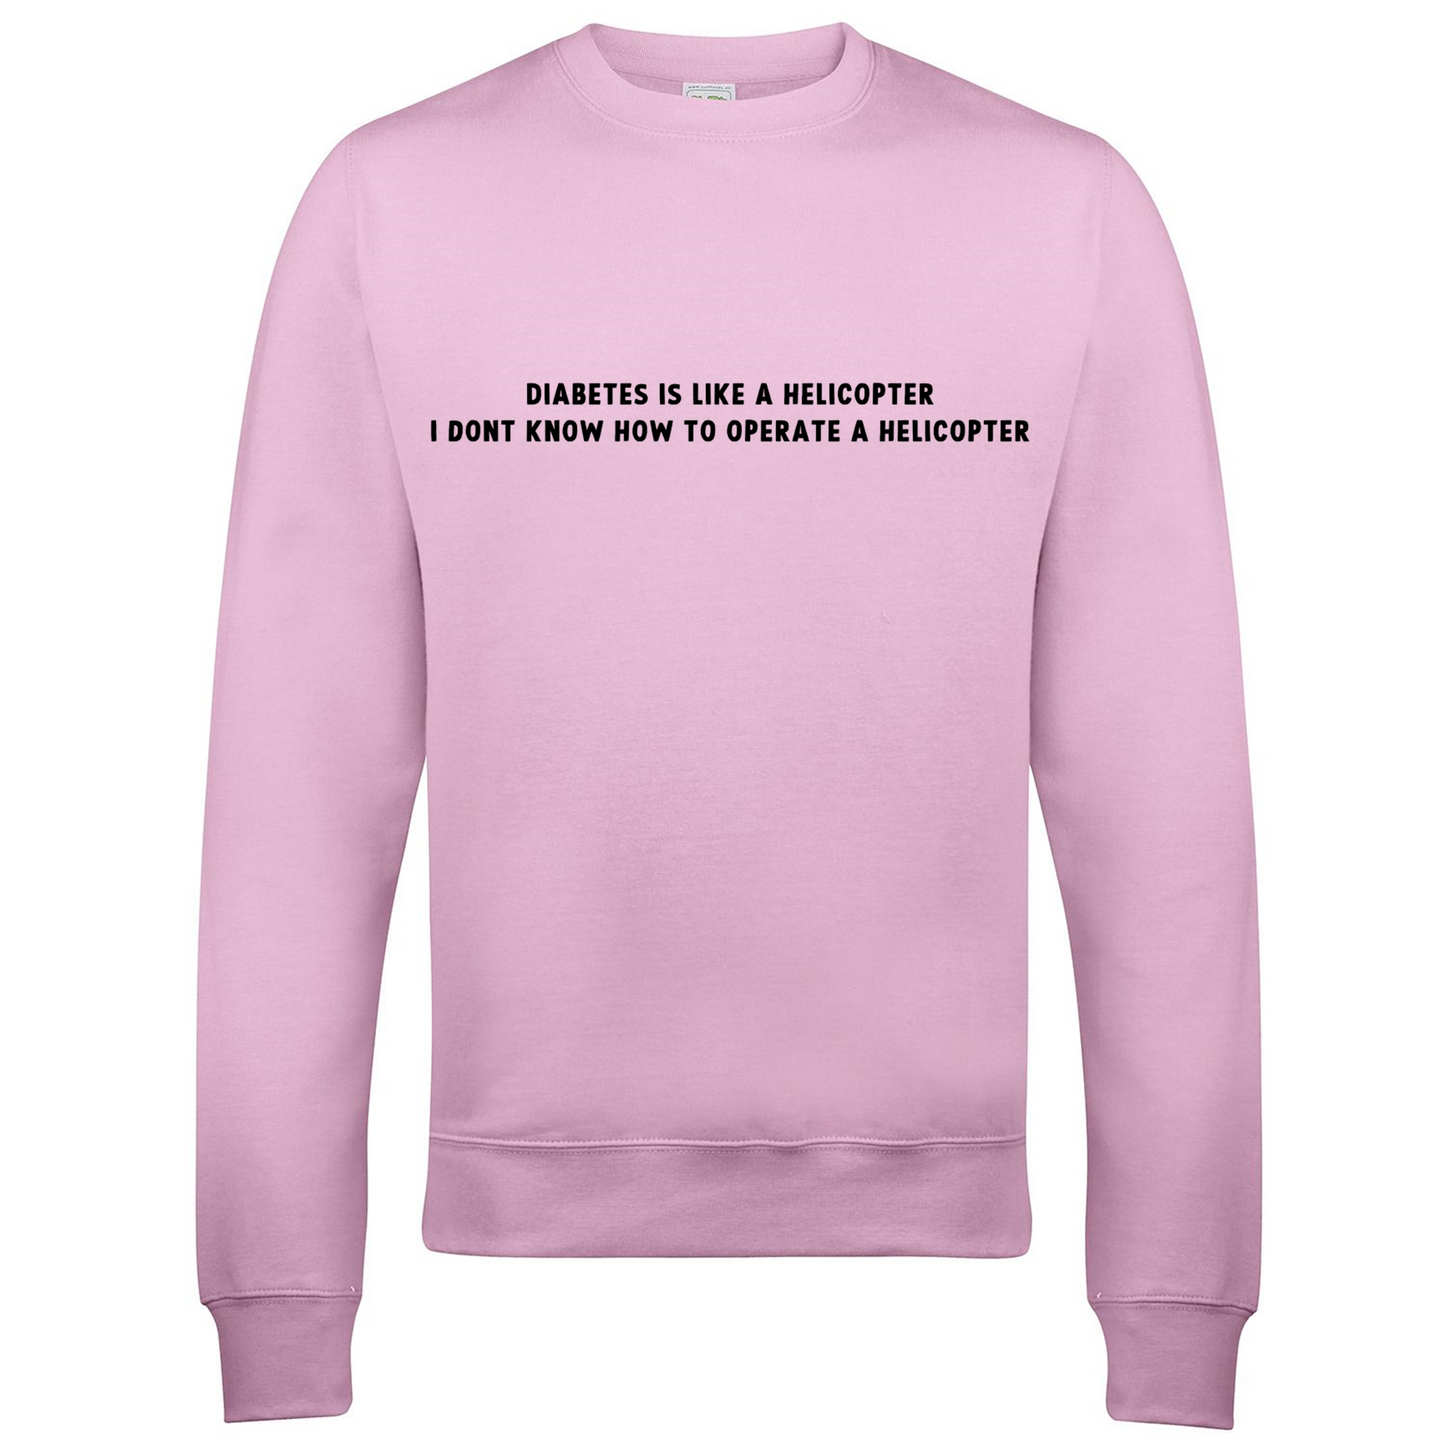 Diabetes Is Like A Helicopter, I Dont Know How To Operate A Helicopter Sweatshirt